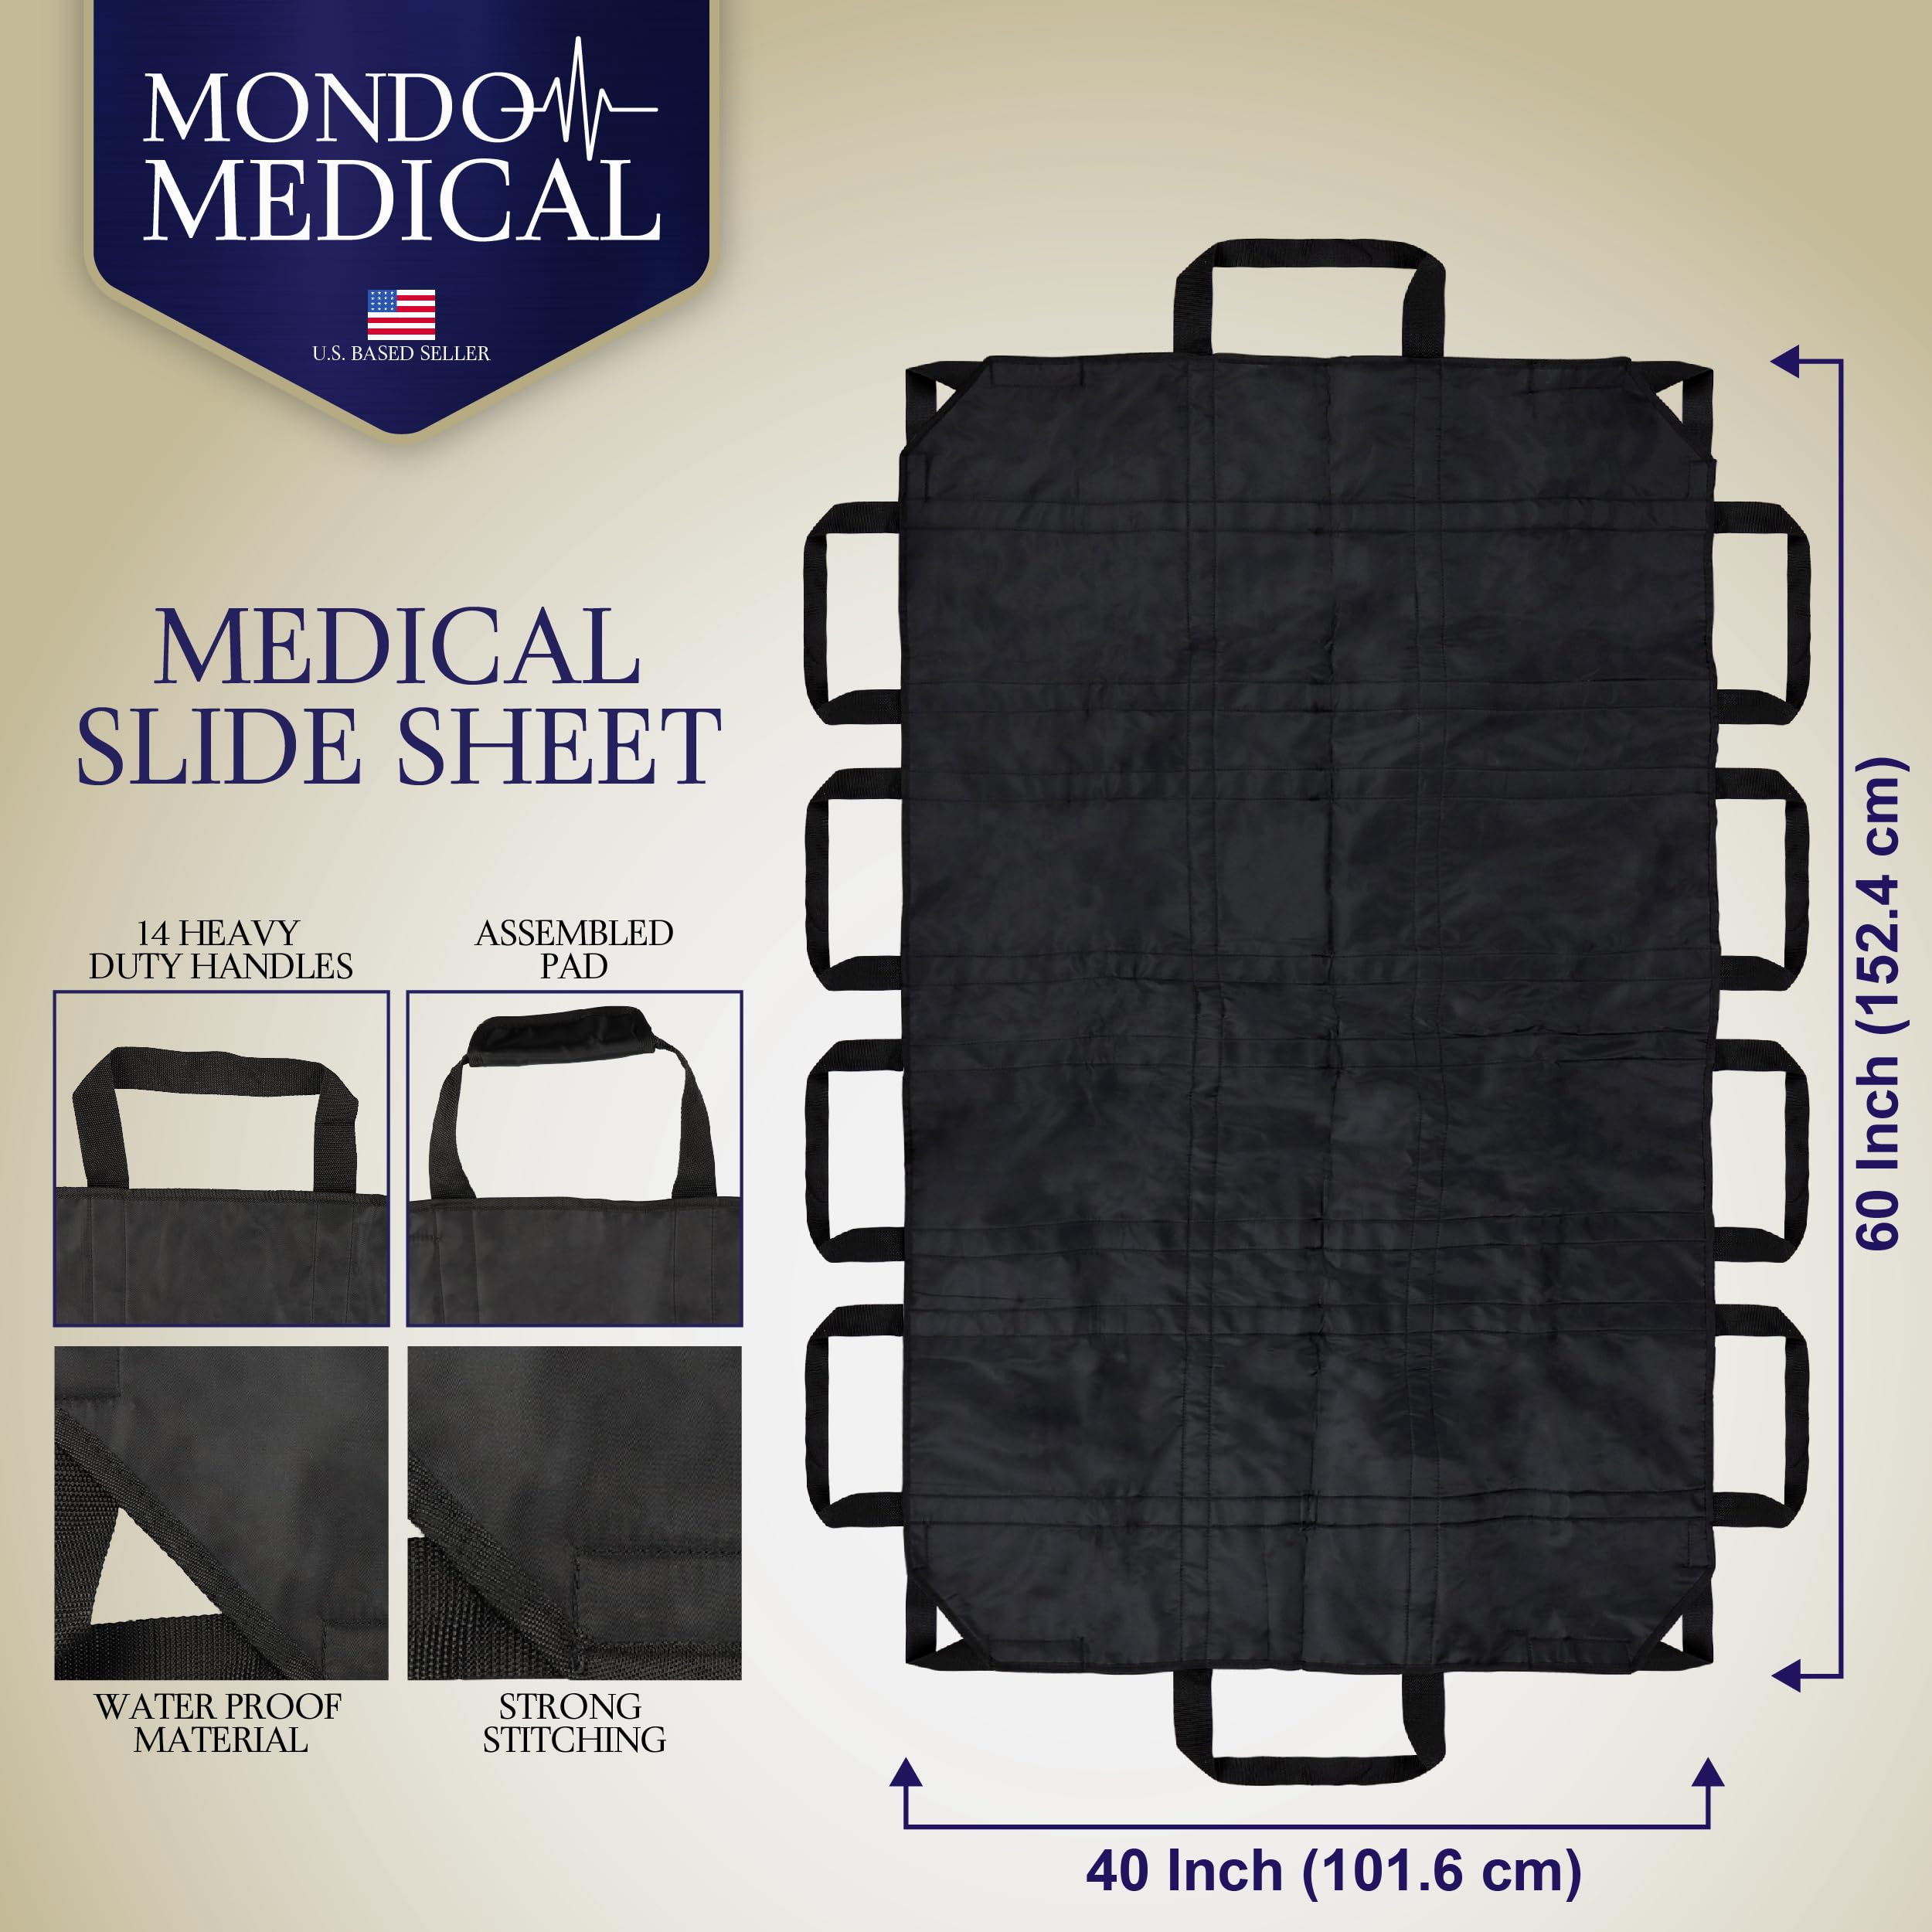 Mondo Medical Washable Bed Pads Elderly Assistance Products 450lbs - 60x40in Draw Sheet Positioning Bed Pad with Handles - Caregiver Supplies Black Slide Sheets for Bedridden Patients with Case